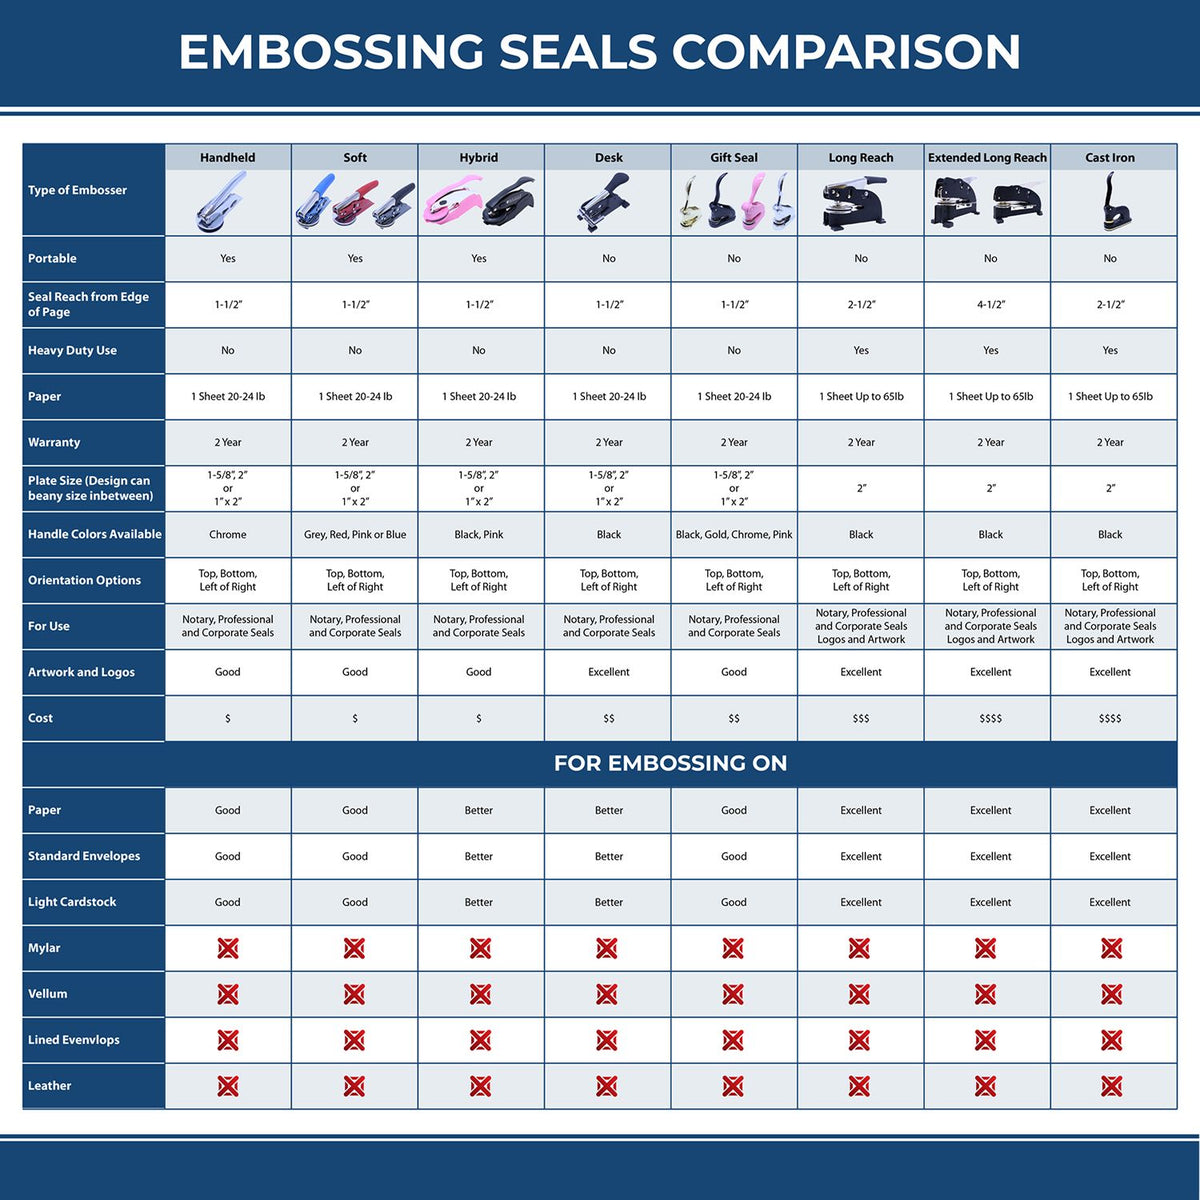 A comparison chart for the different types of mount models available for the New Hampshire Desk Architect Embossing Seal.